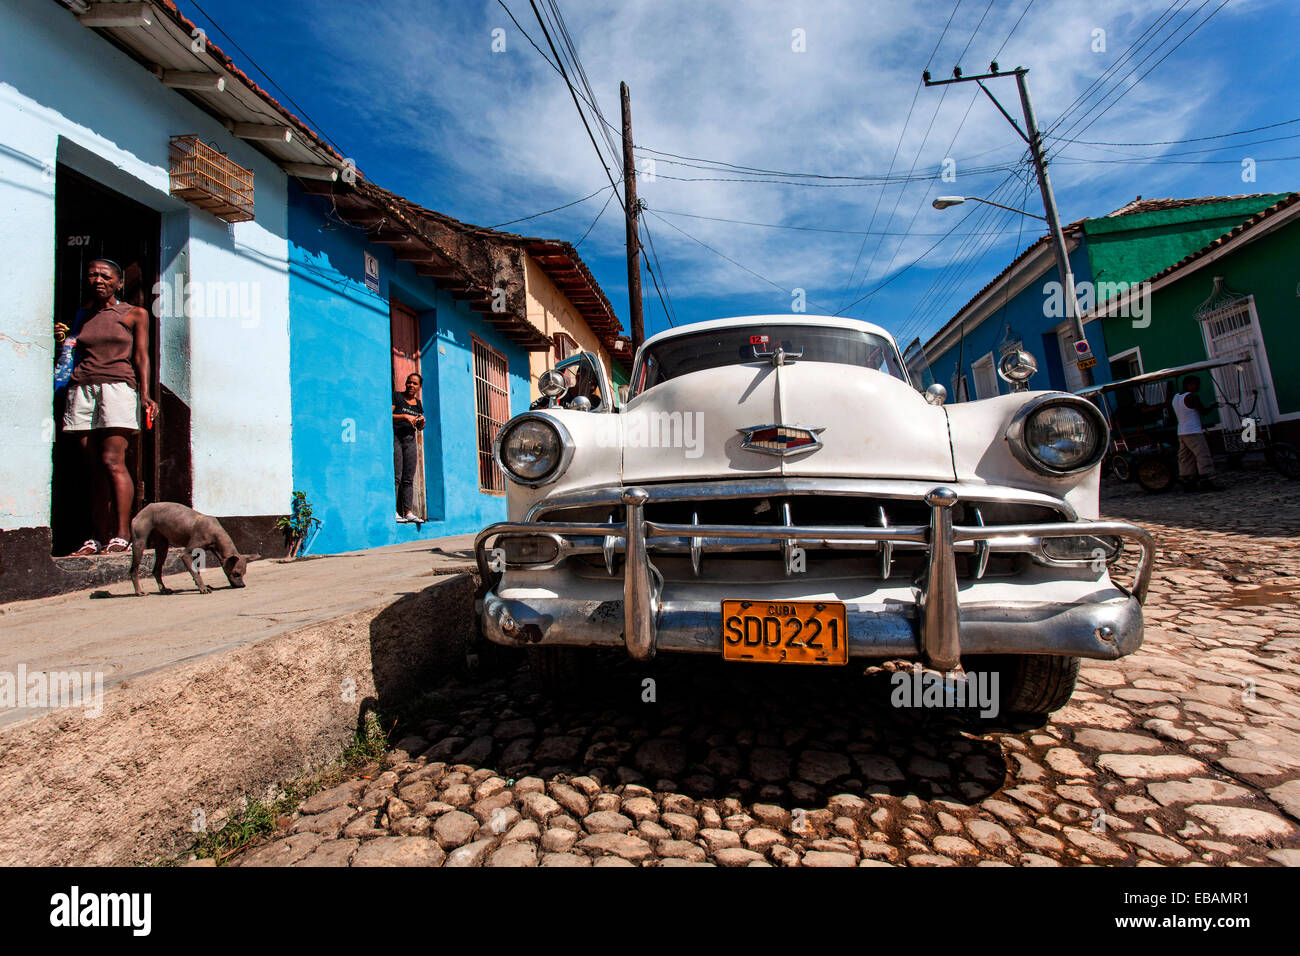 Vintage Chevrolet, from the 1940s, Trinidad, Cuba Stock Photo